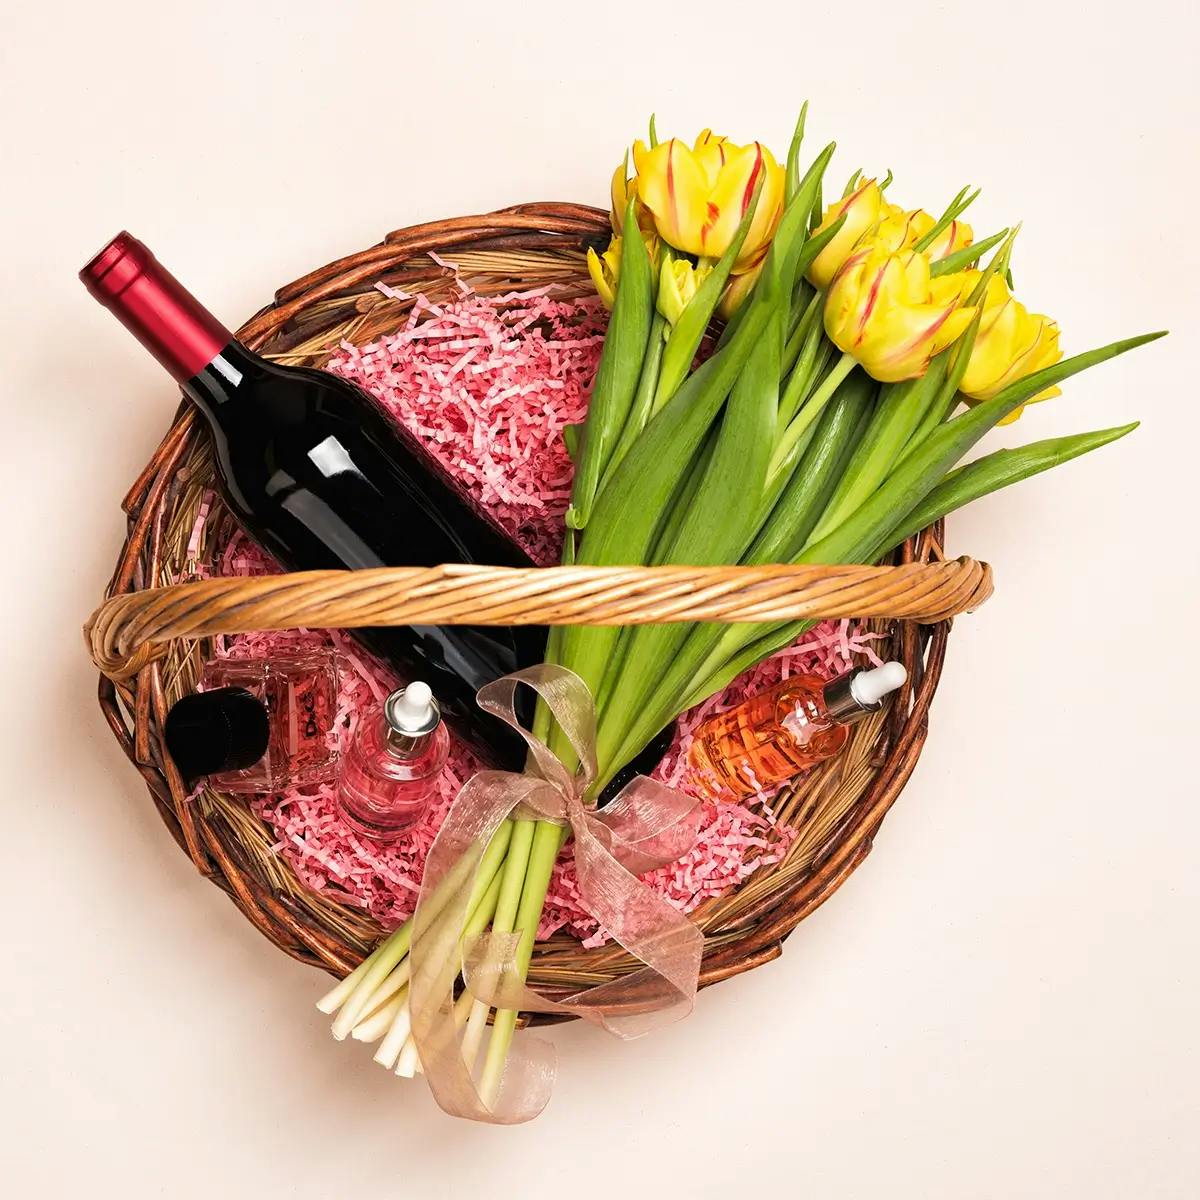 Easter basket for adults with wine, daffodils, and perfume.